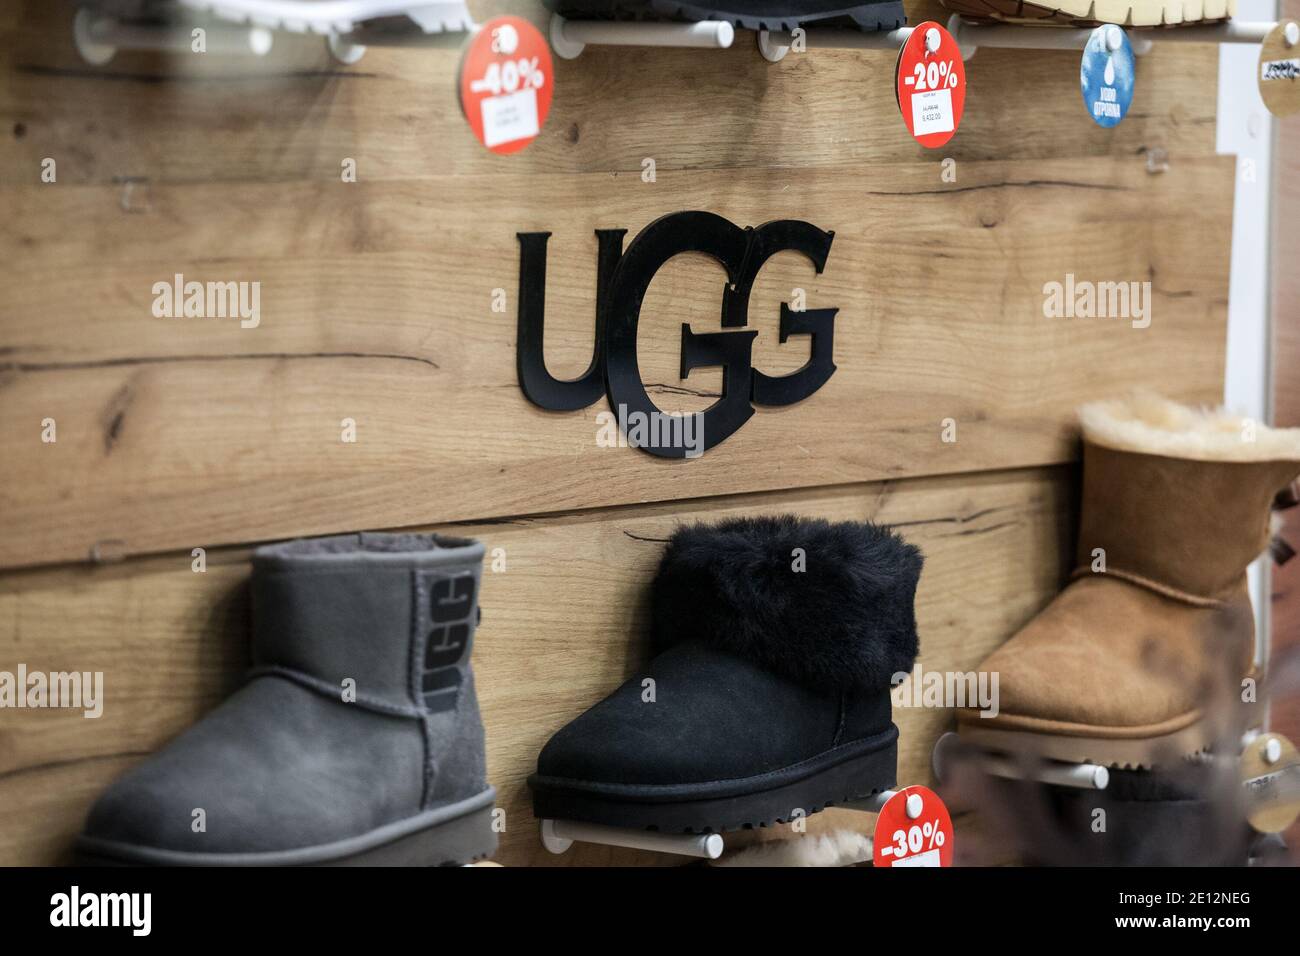 BELGRADE, SERBIA - DECEMBER 8 2020: Ugg logo in front of some of their  boots for sale in a shop. Ugg is an american footwear brand known for their  she Stock Photo - Alamy